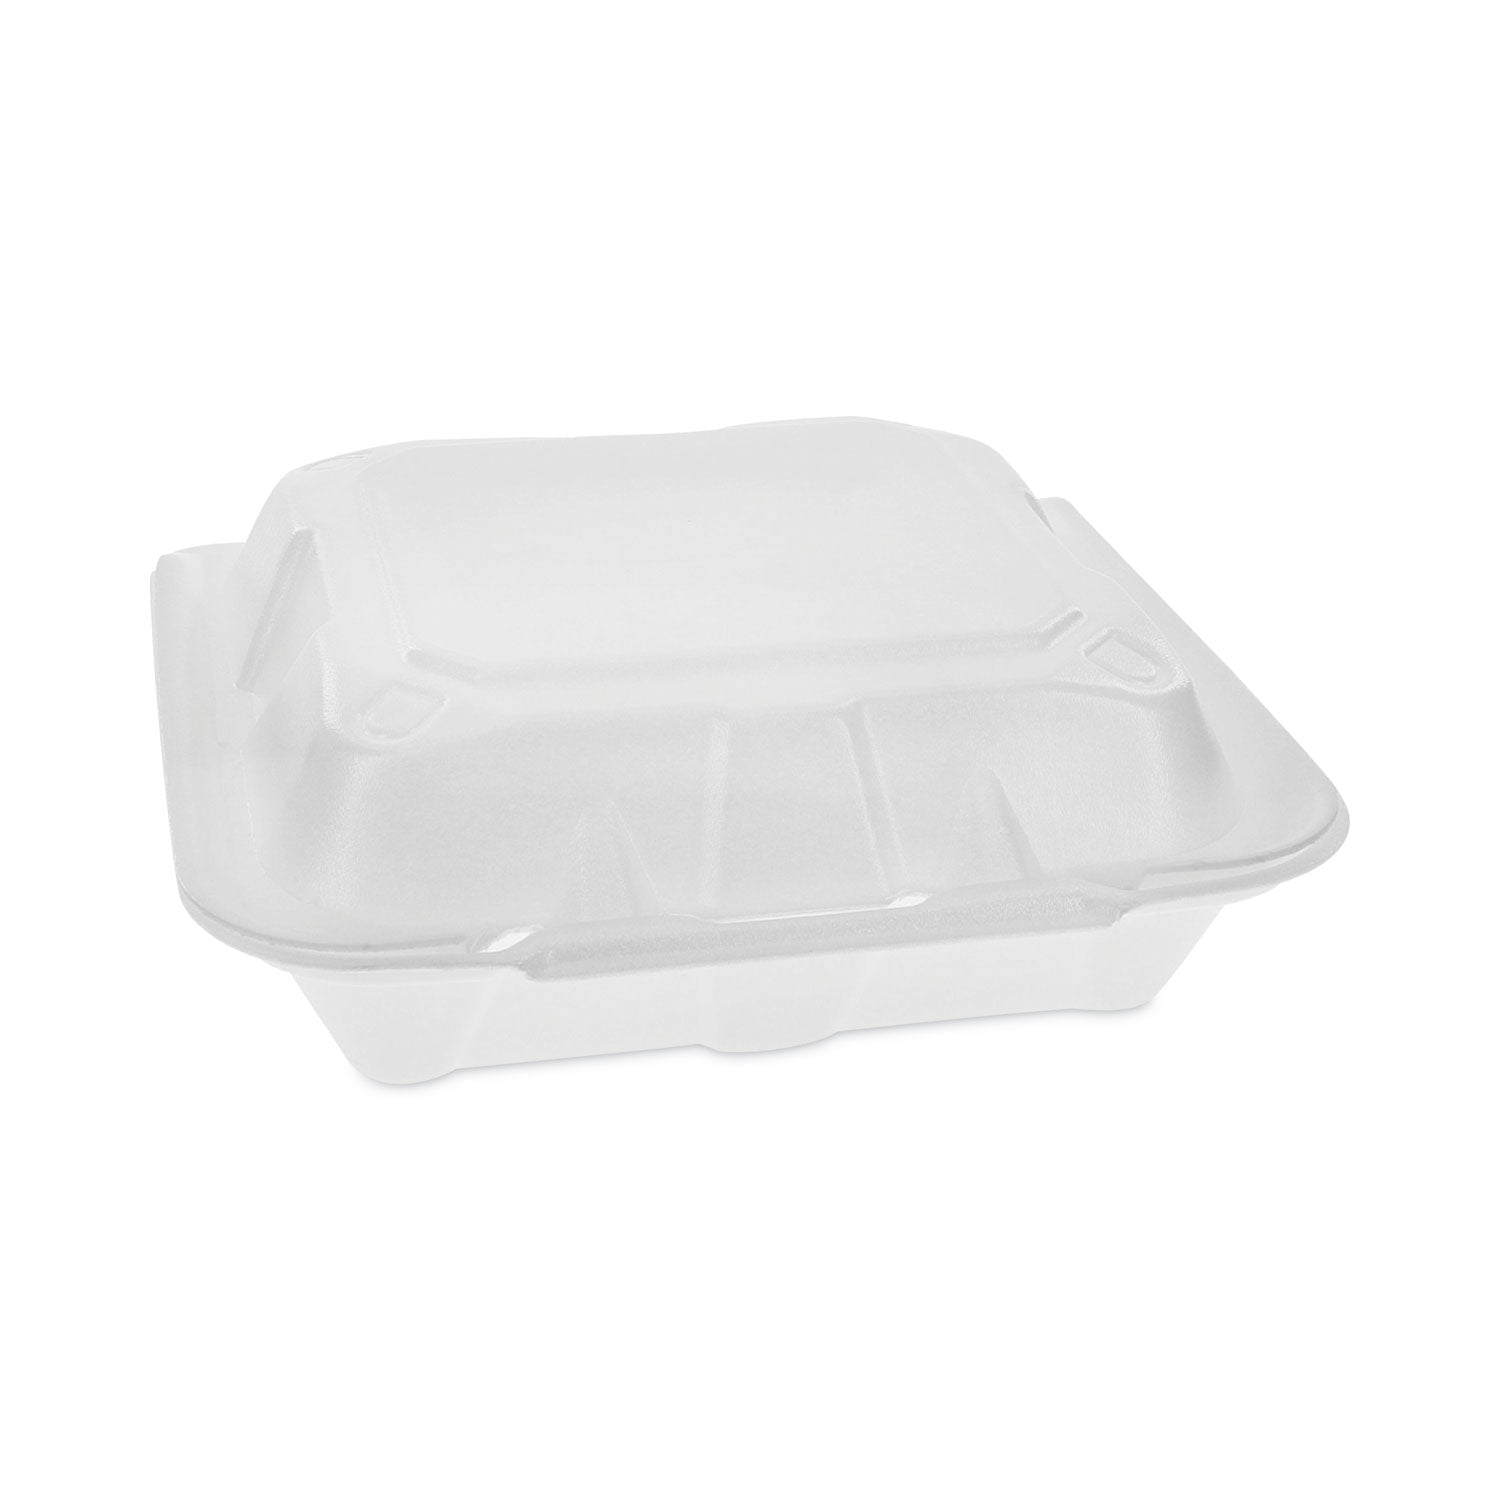 vented-foam-hinged-lid-container-dual-tab-lock-economy-842-x-815-x-3-white-150-carton_pctytd18801econ - 1